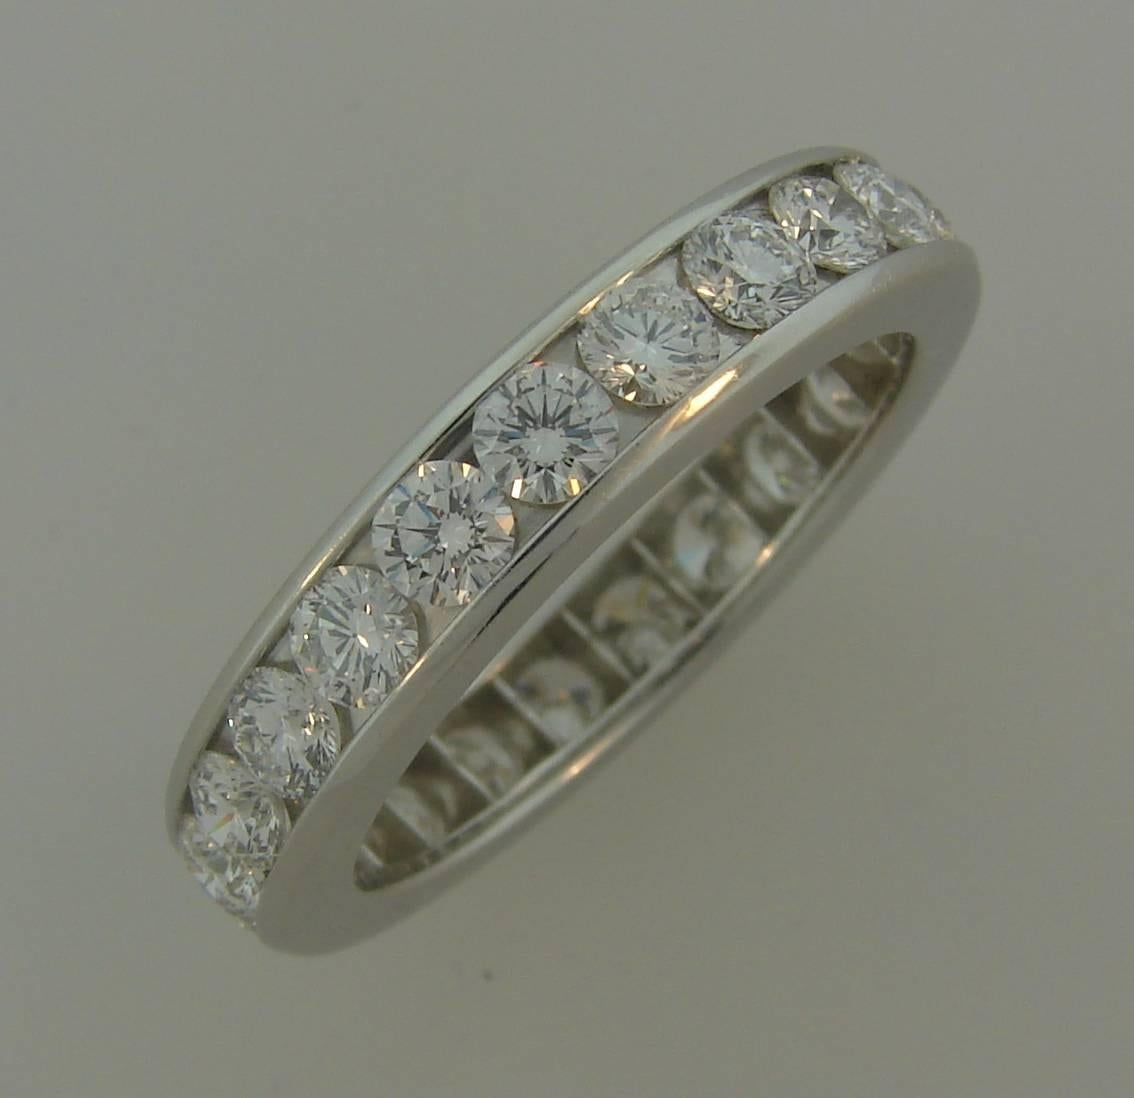  Classy and timeless diamond eternity band created by Tiffany & Co. 
Made of platinum and set with twenty three round brilliant cut diamonds approximately 0.10-carat each. Diamonds are F-G color VVS2 clarity, total weight approximately 2.30 carats.